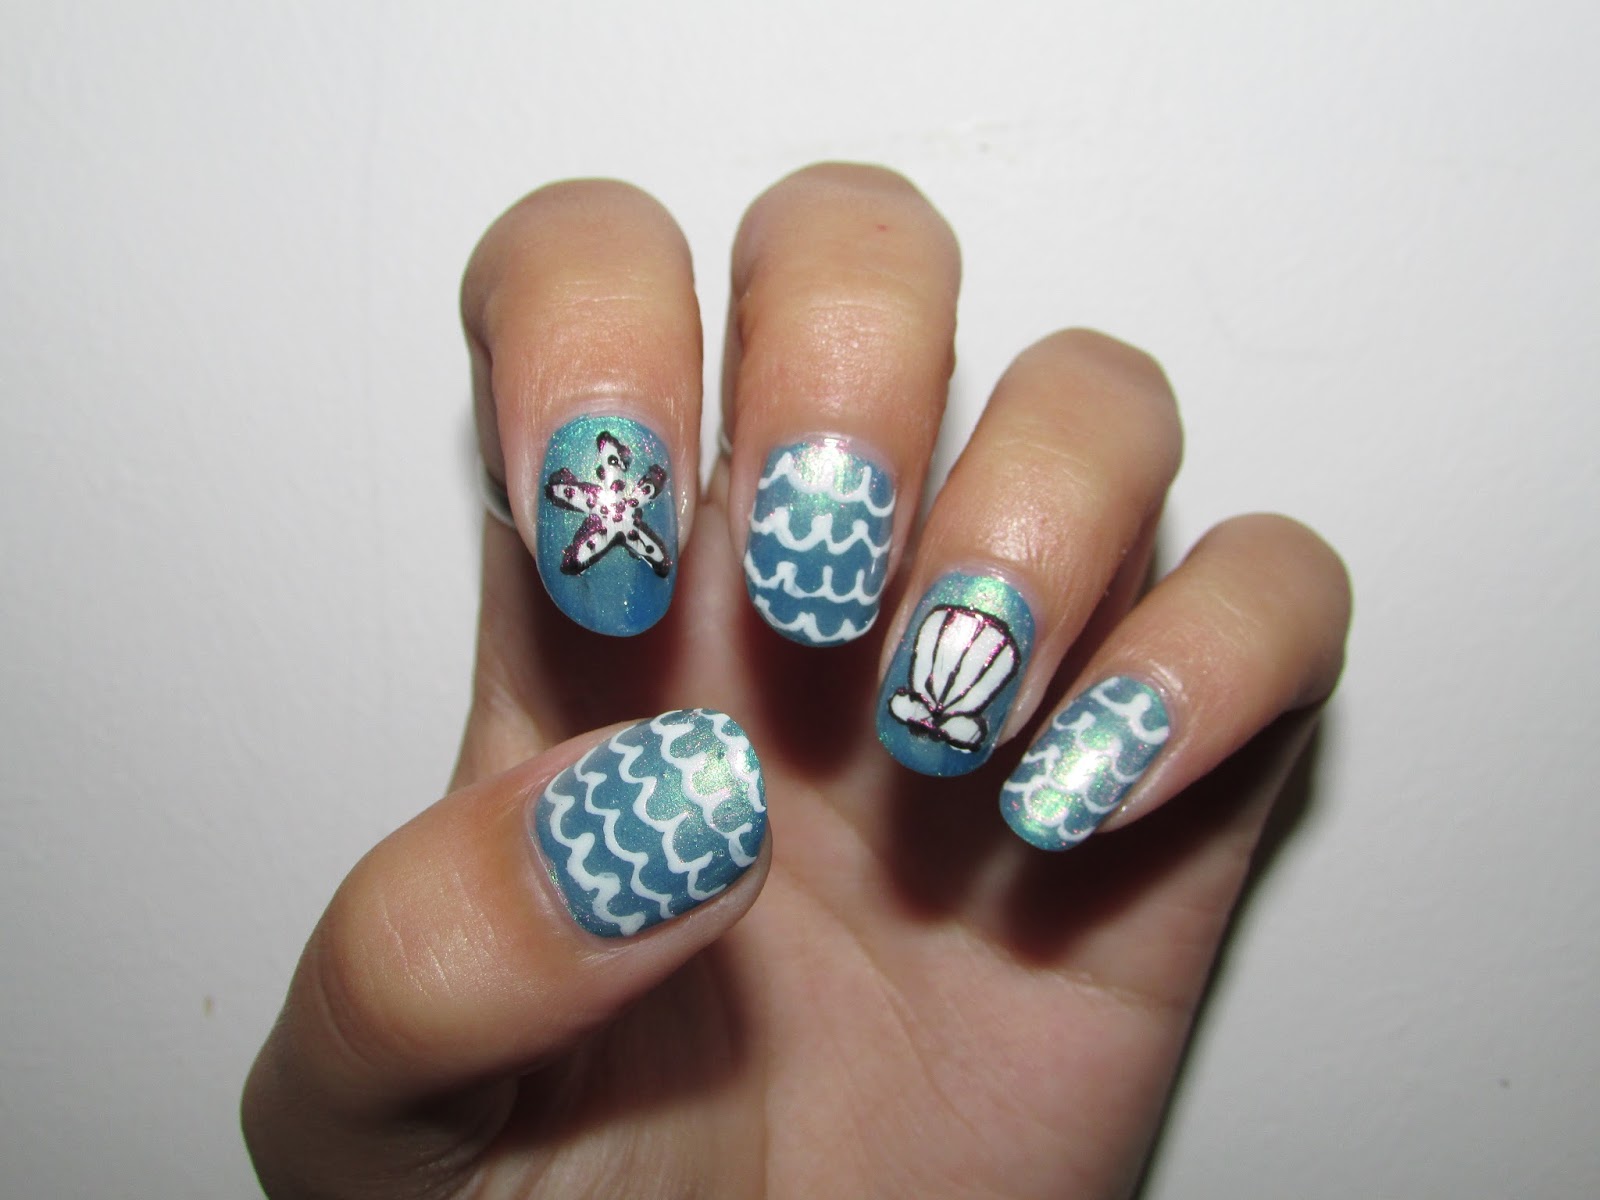 Mermaid Chrome Nail Designs for Short Nails - wide 2